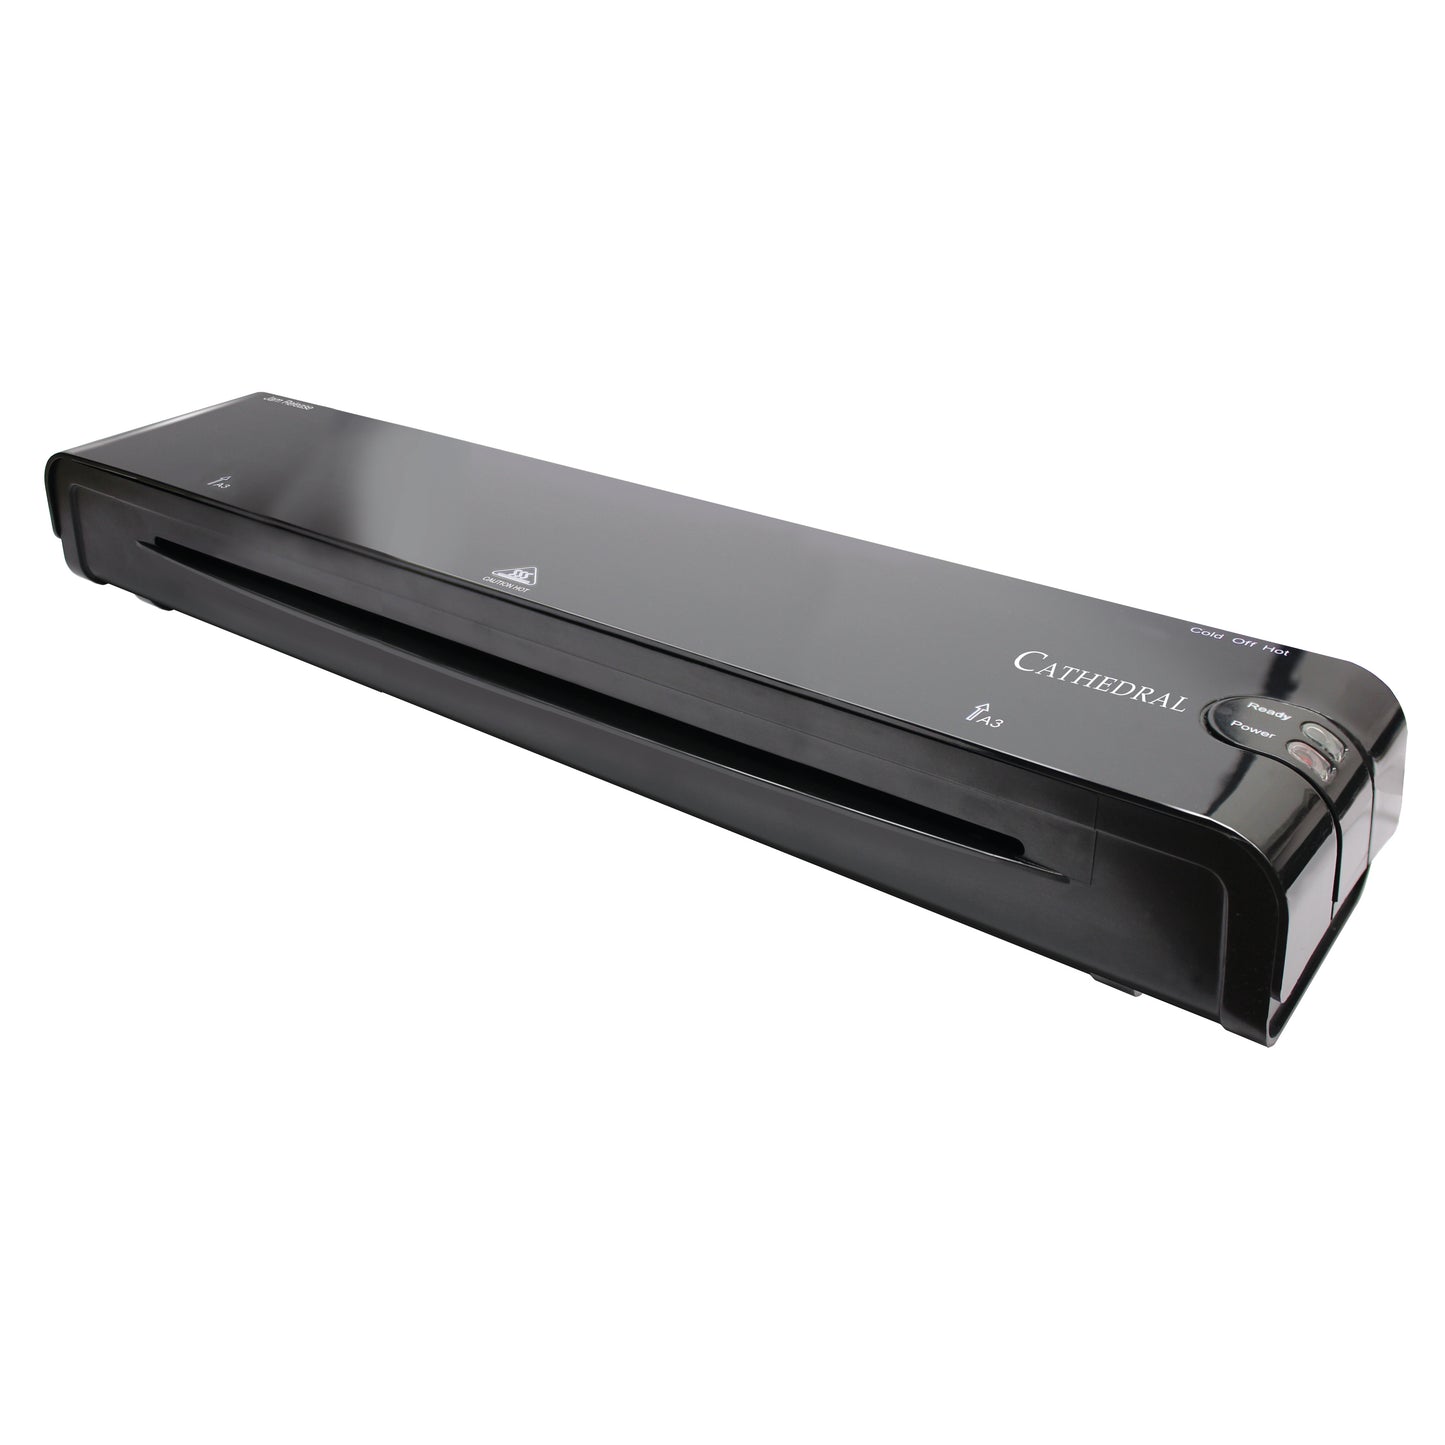 A3 Laminator - With Fast Warm Up & Jam Release